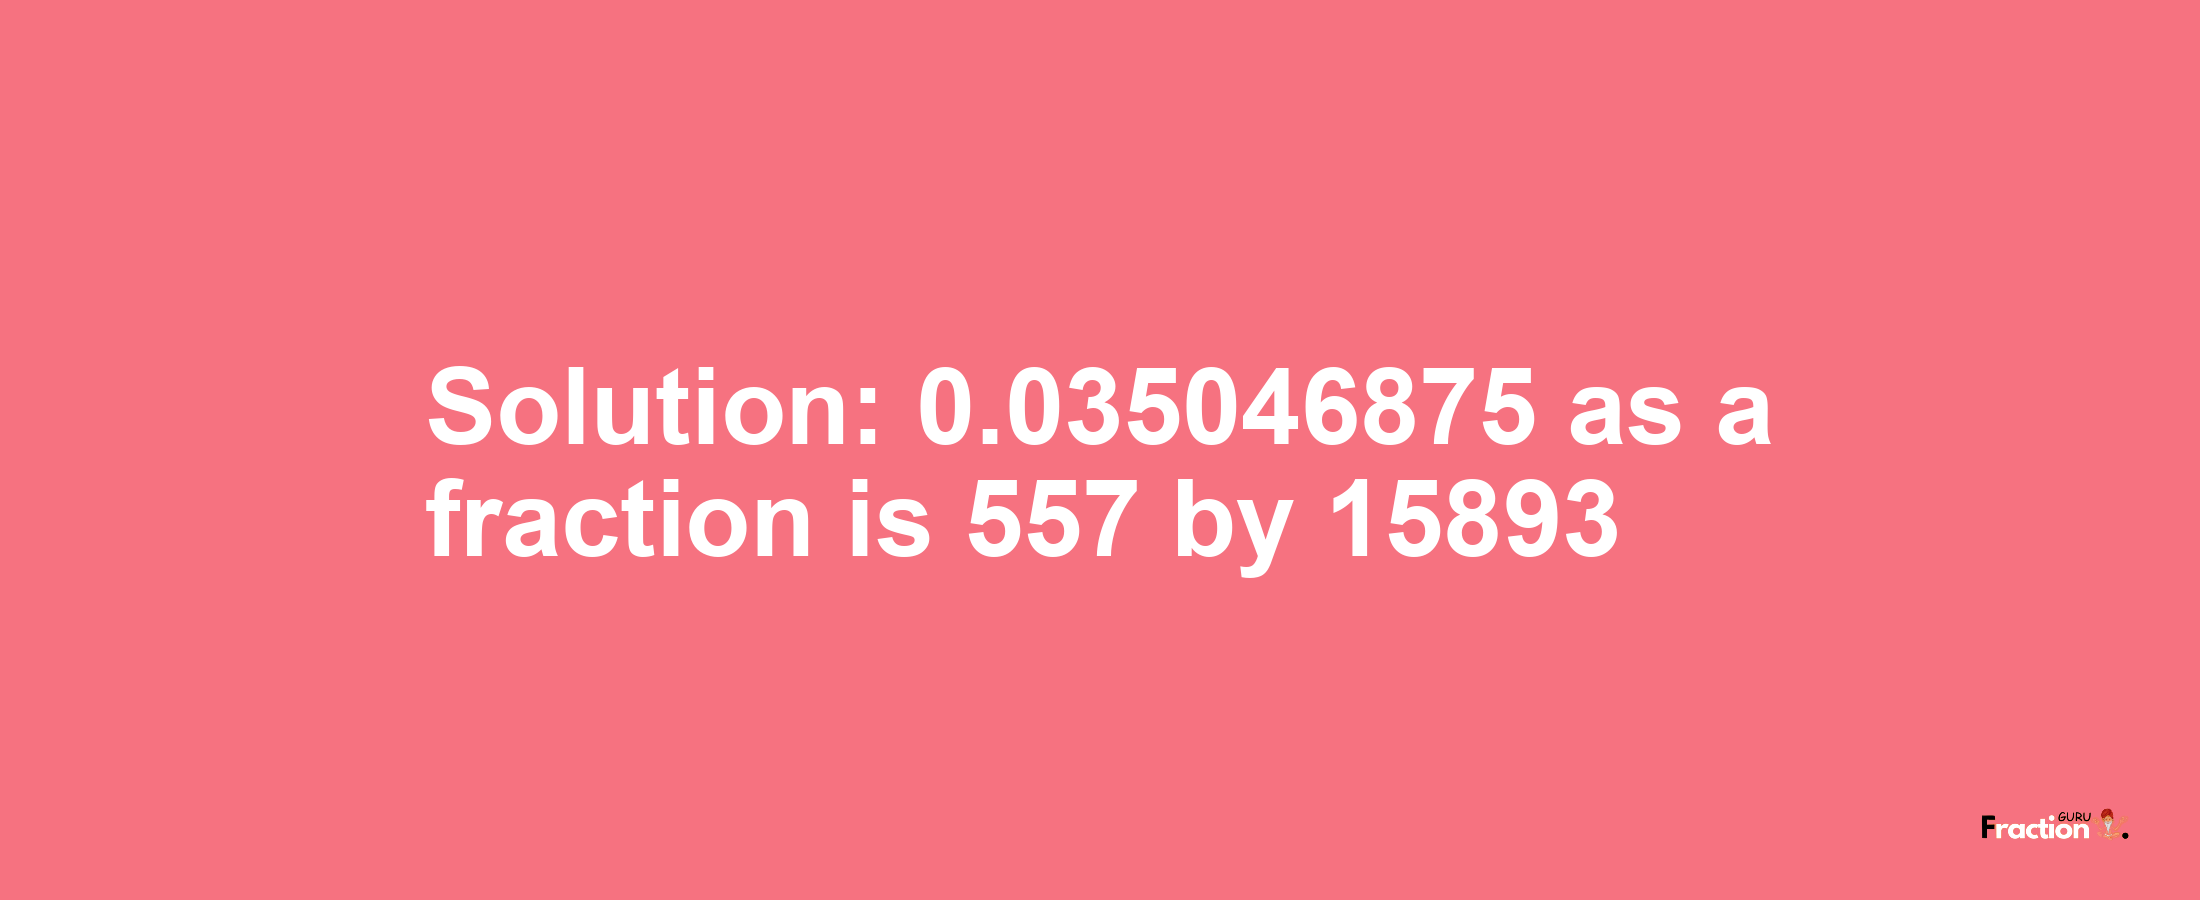 Solution:0.035046875 as a fraction is 557/15893